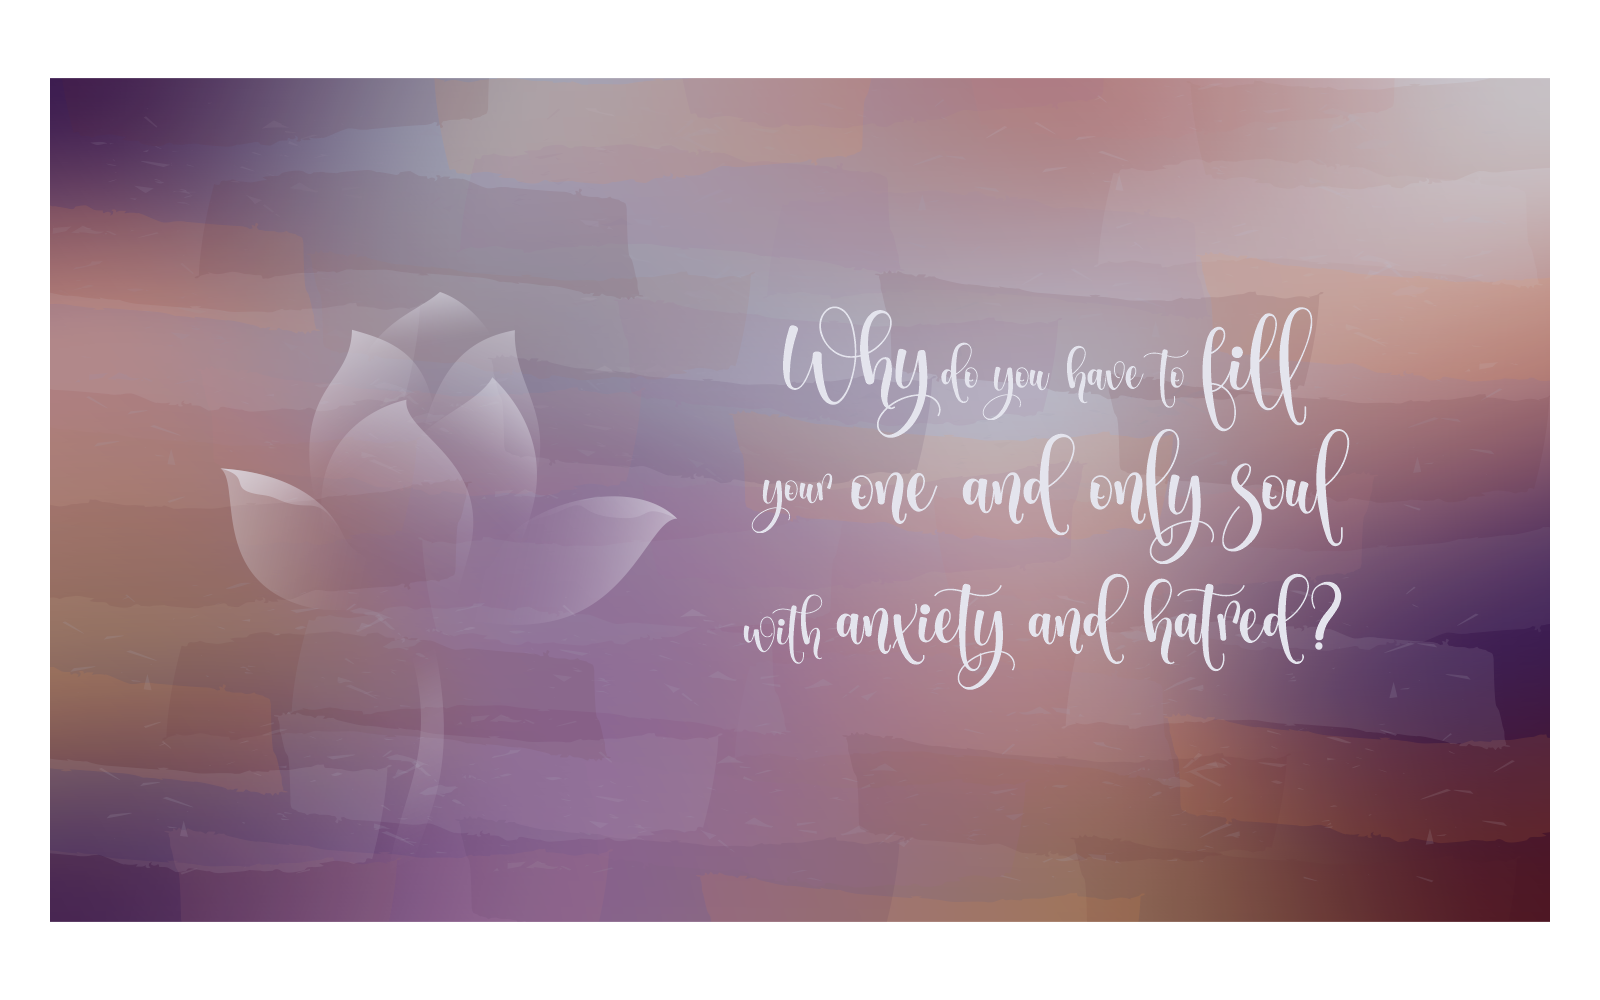 Inspirational Background Image 14400x8100px With Lotus Bud And Message of Choice